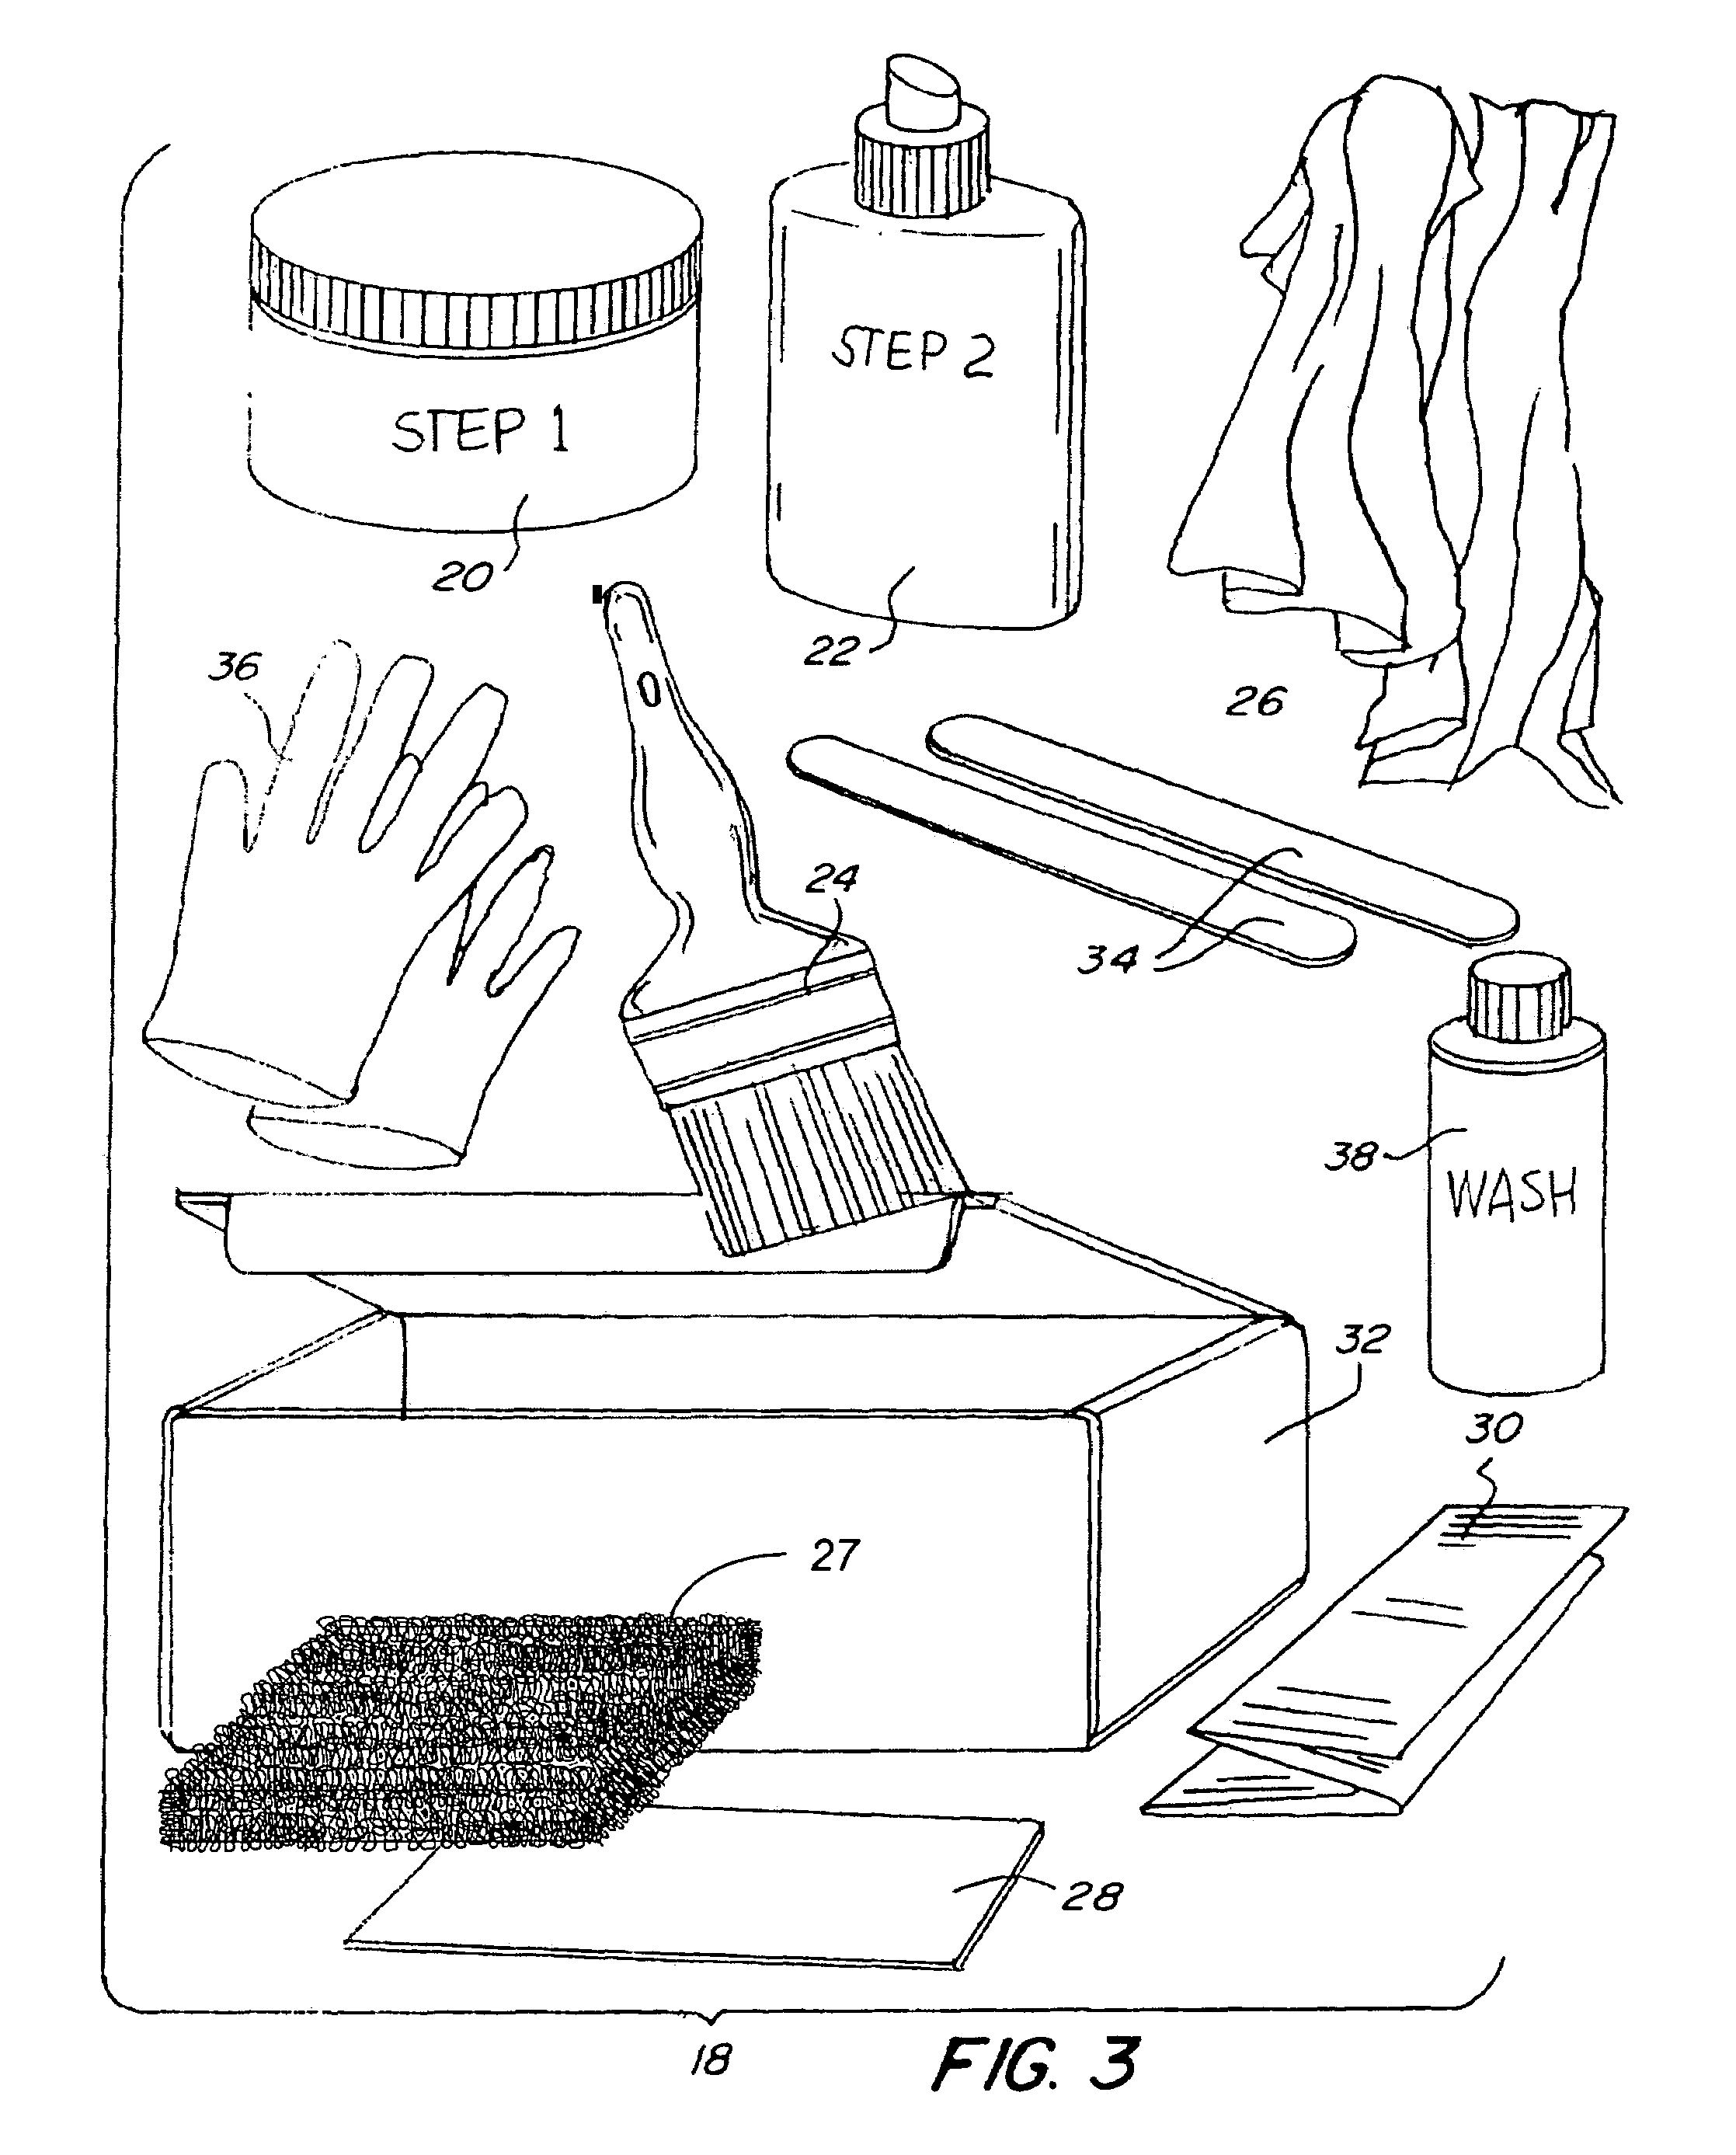 Process for imparting a wood color and grain to a substrate